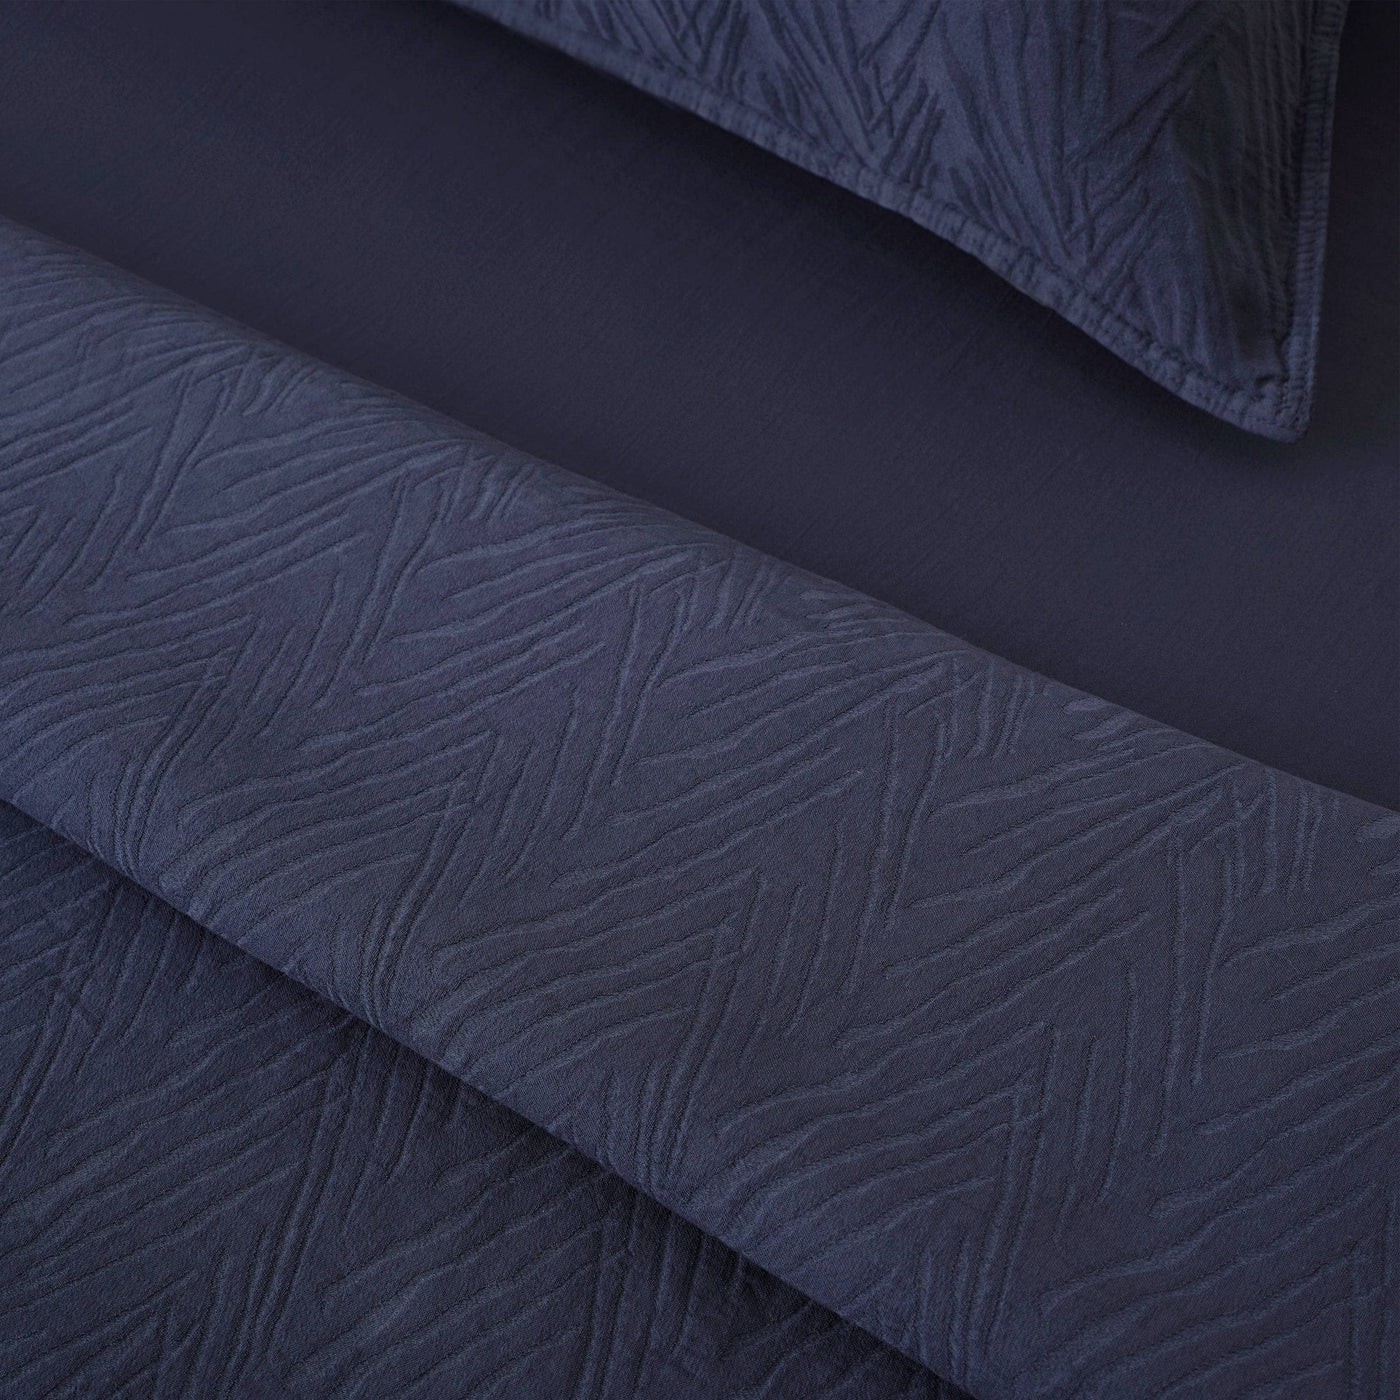 Freddie 100% Turkish Cotton 300 TC Fitted Sheet, Navy, Super King Size Bed Sheets sazy.com